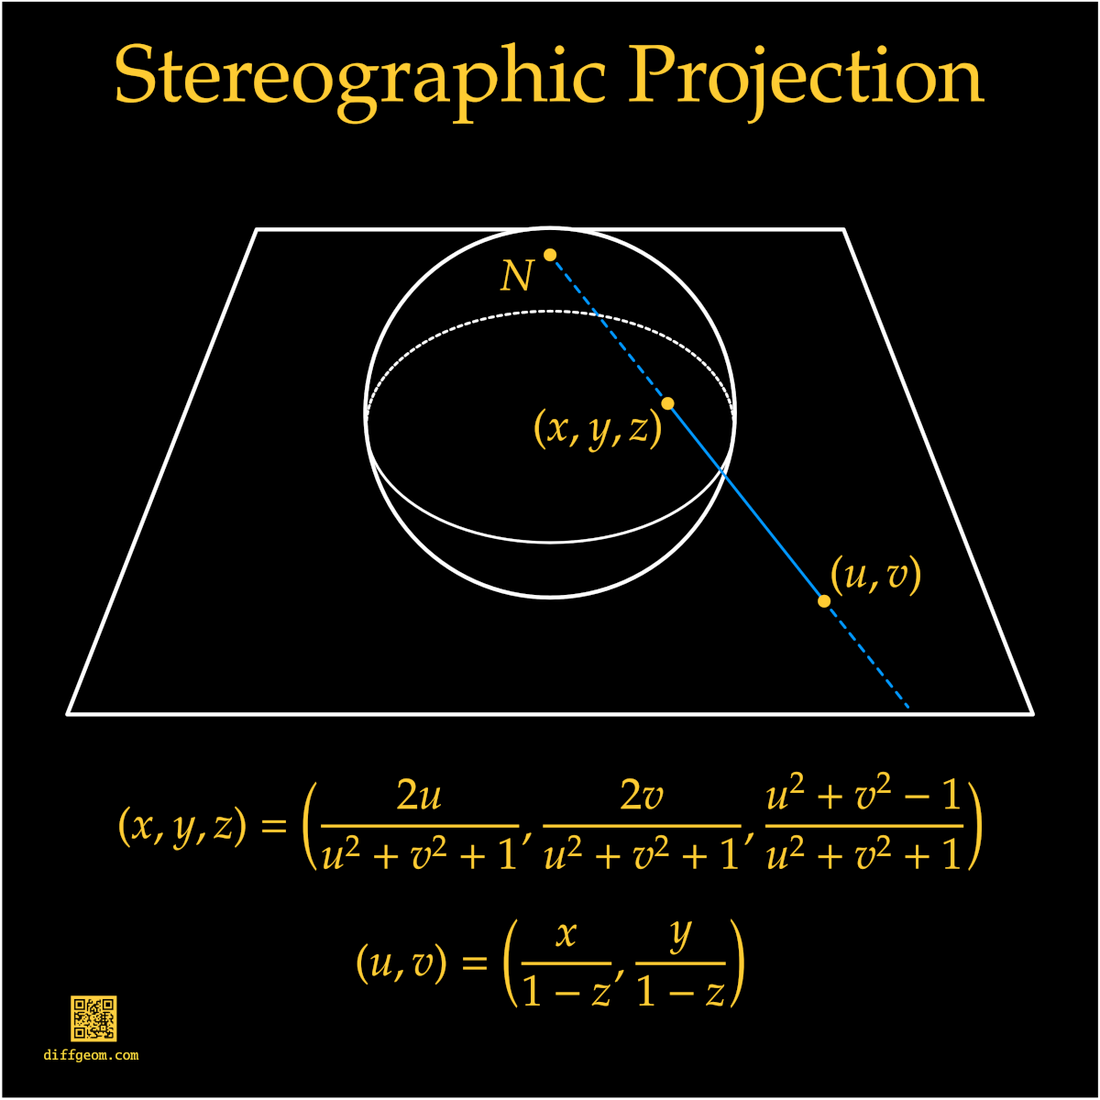 Stereographic projection from a punctured sphere to the plane